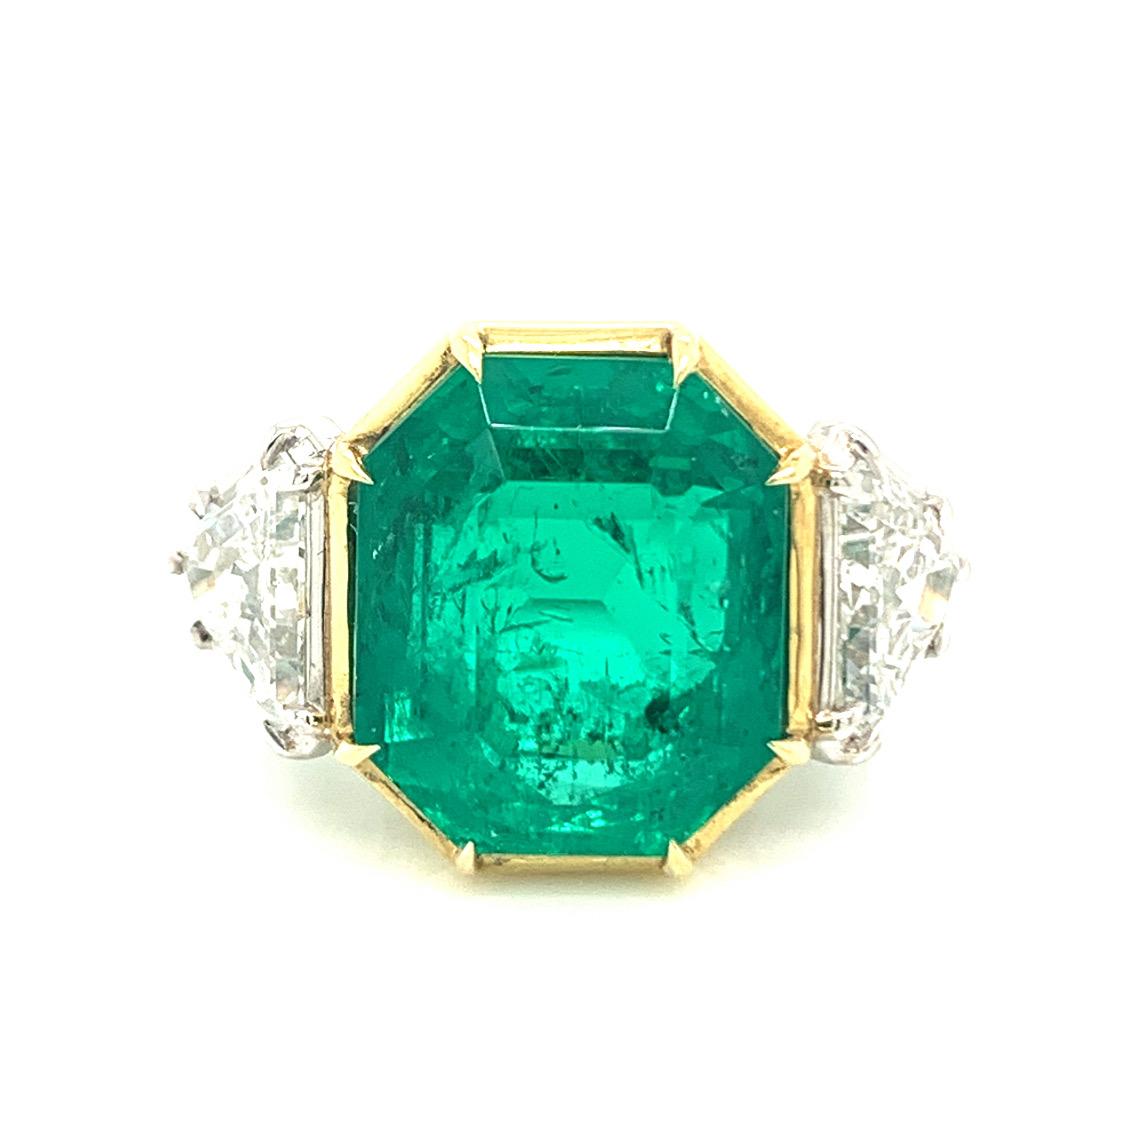 Are you someone who is confident, fashionable and graceful? This will satisfy your desire for a spectacular emerald & diamond ring. All the requirements are fulfilled with this stunning AGL certified 10.03 carat Colombian emerald and by two very